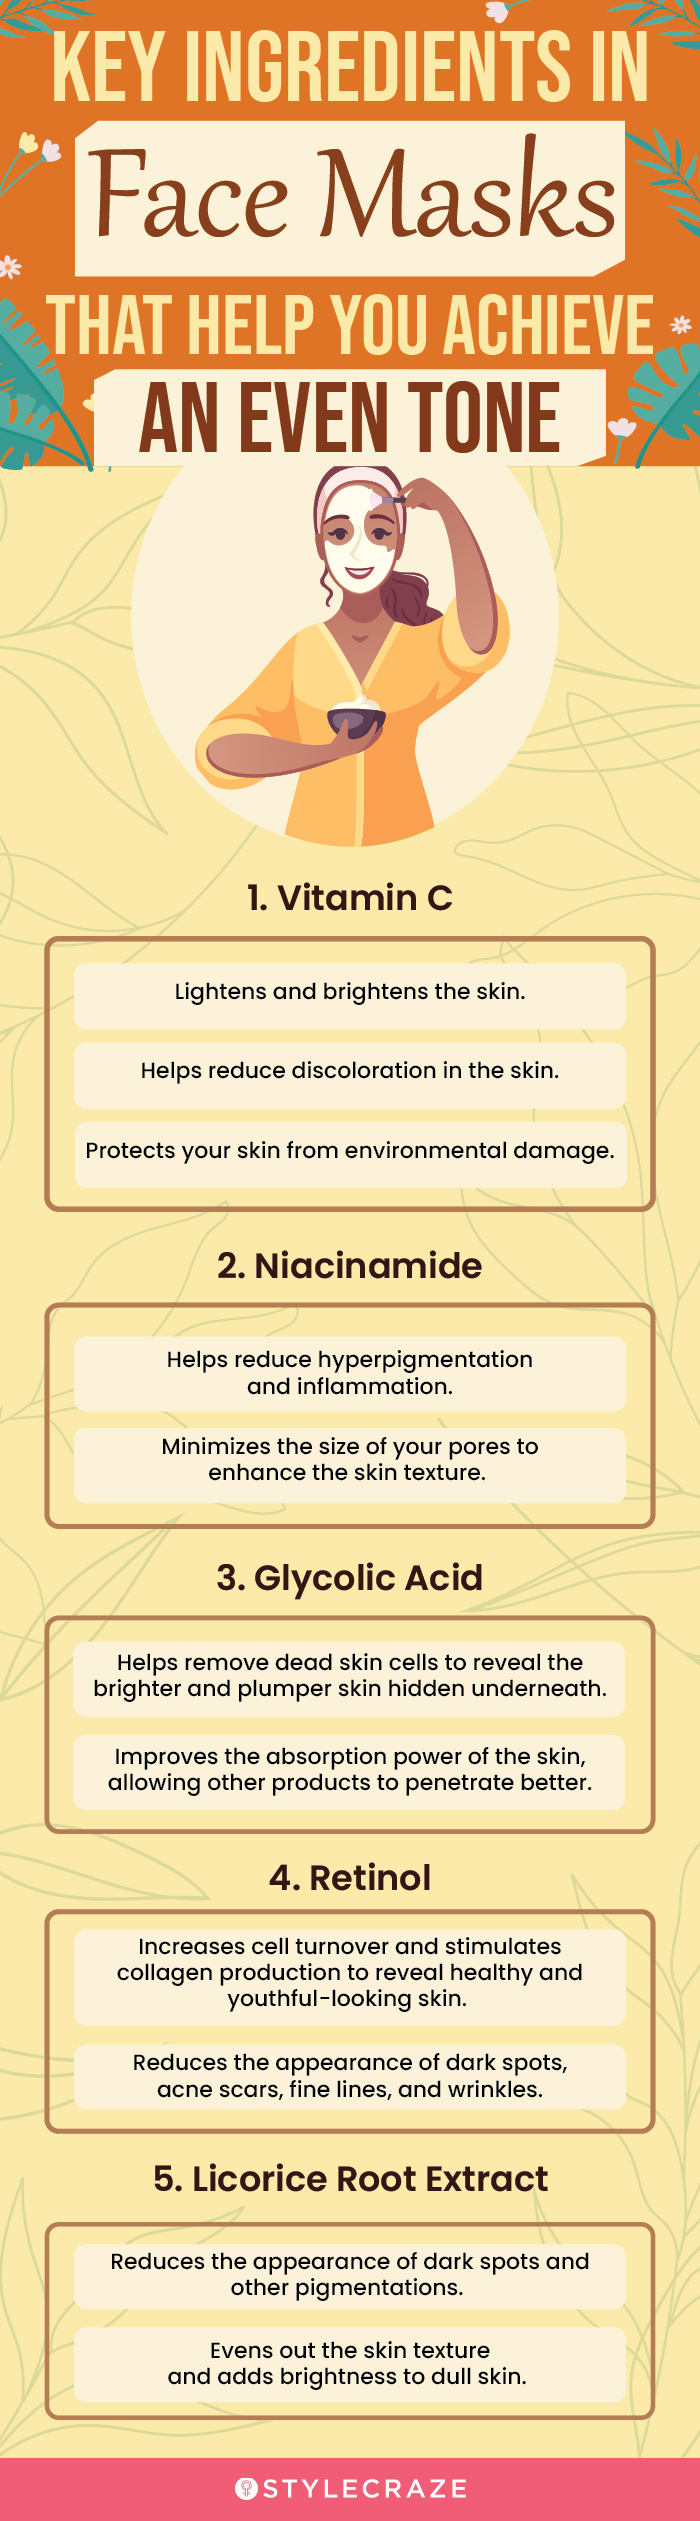 Key Ingredients In Face Masks That Help You Achieve An Even Tone (infographic)